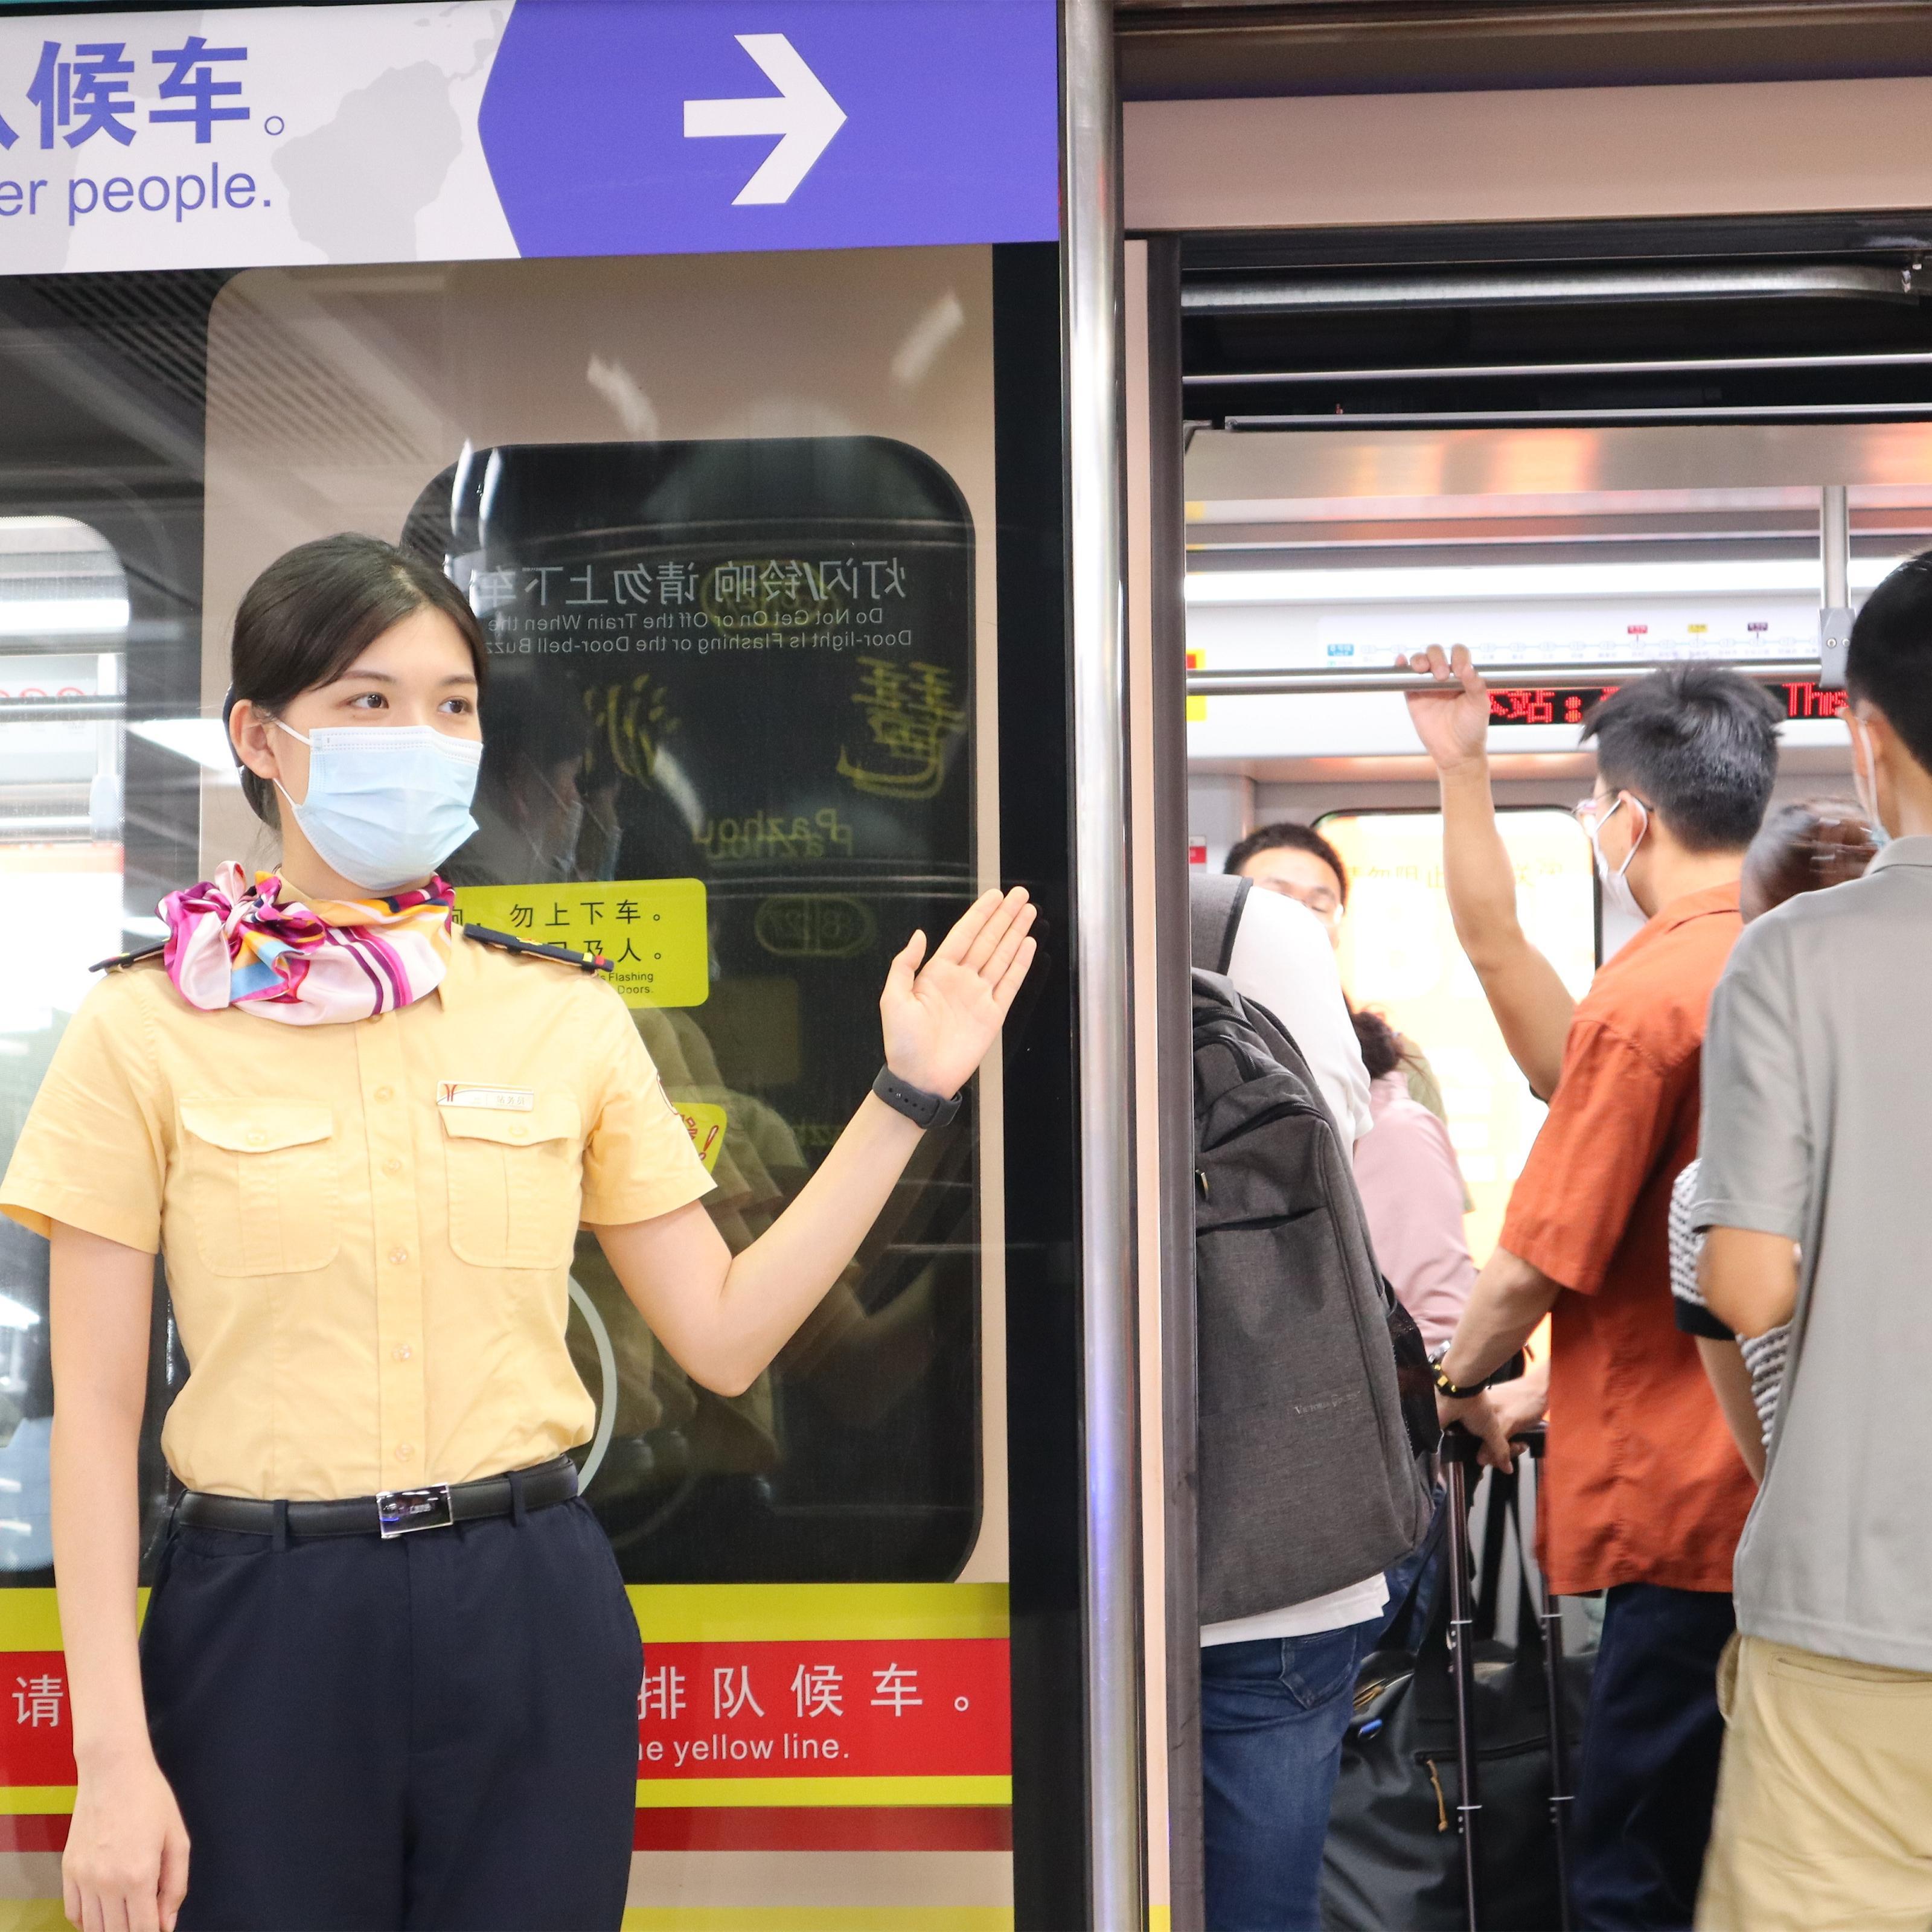 Guangzhou subway passengers must remove scary Halloween makeup before entering